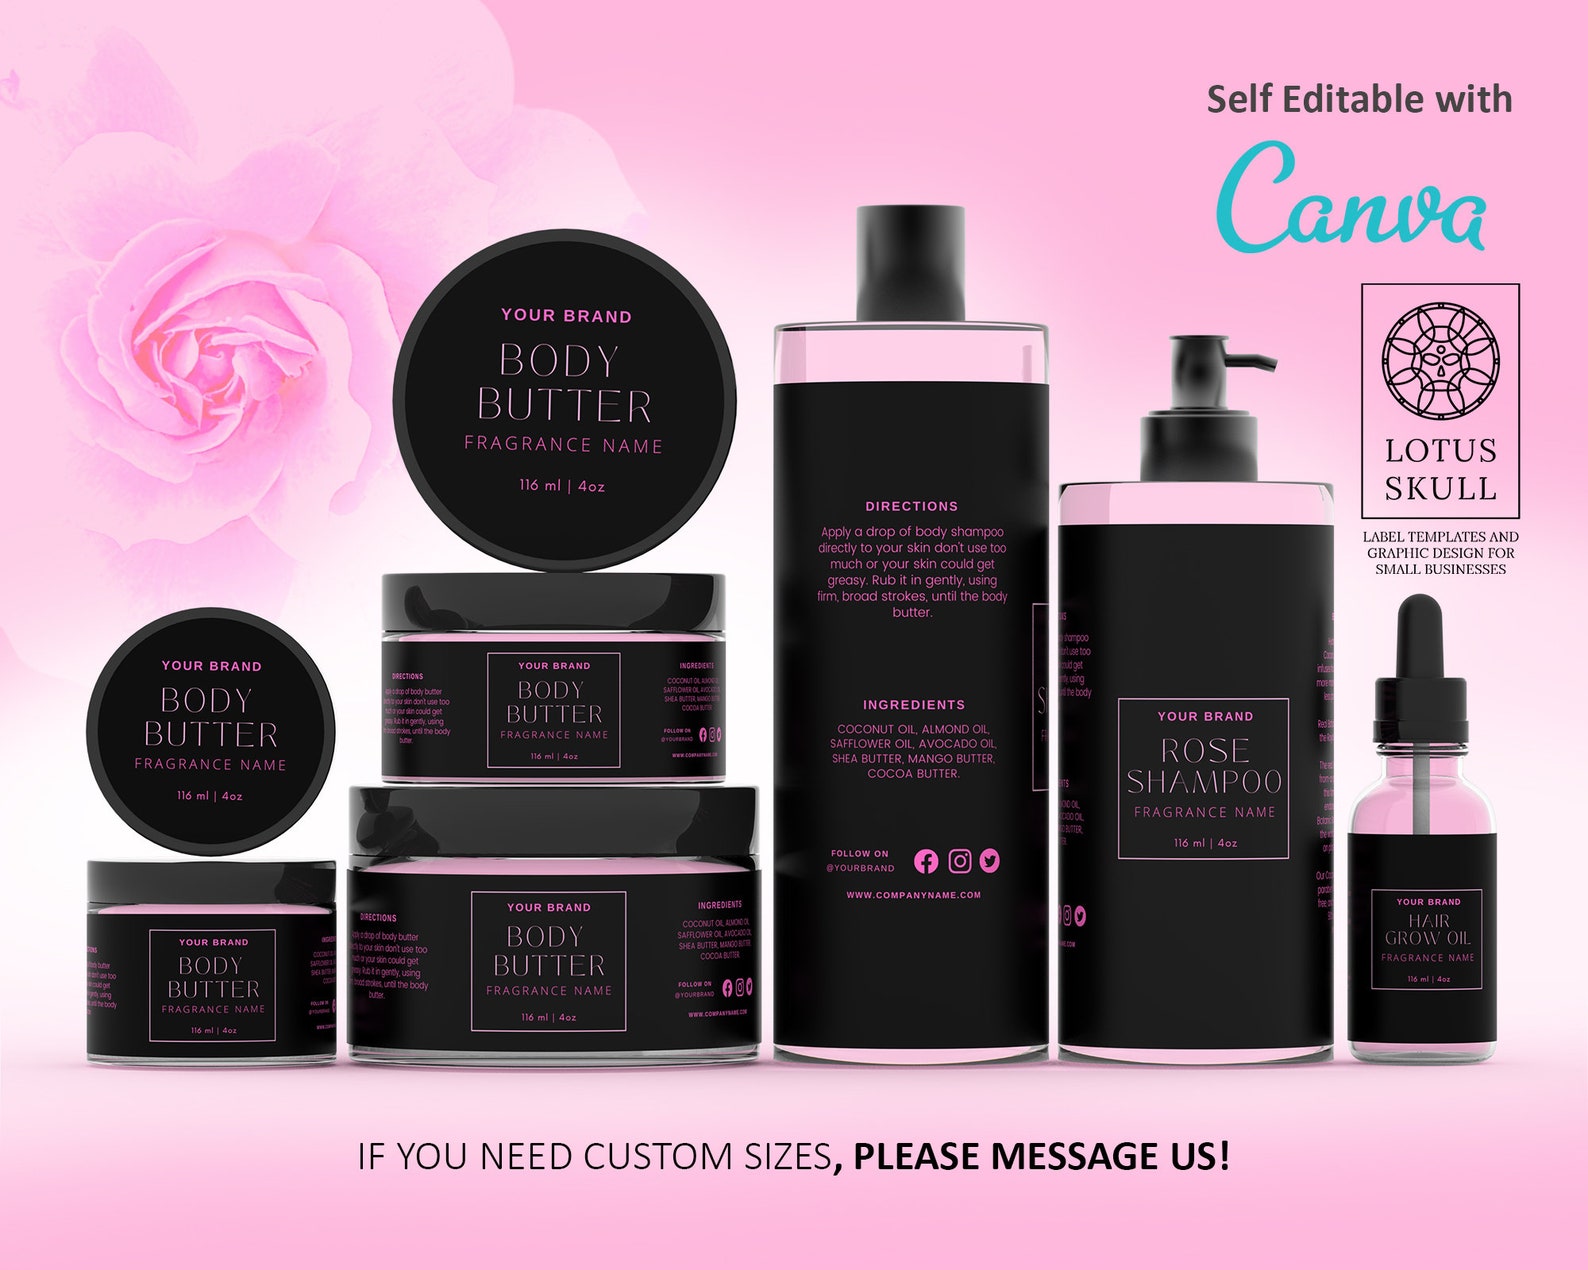 Cosmetic Label Templates